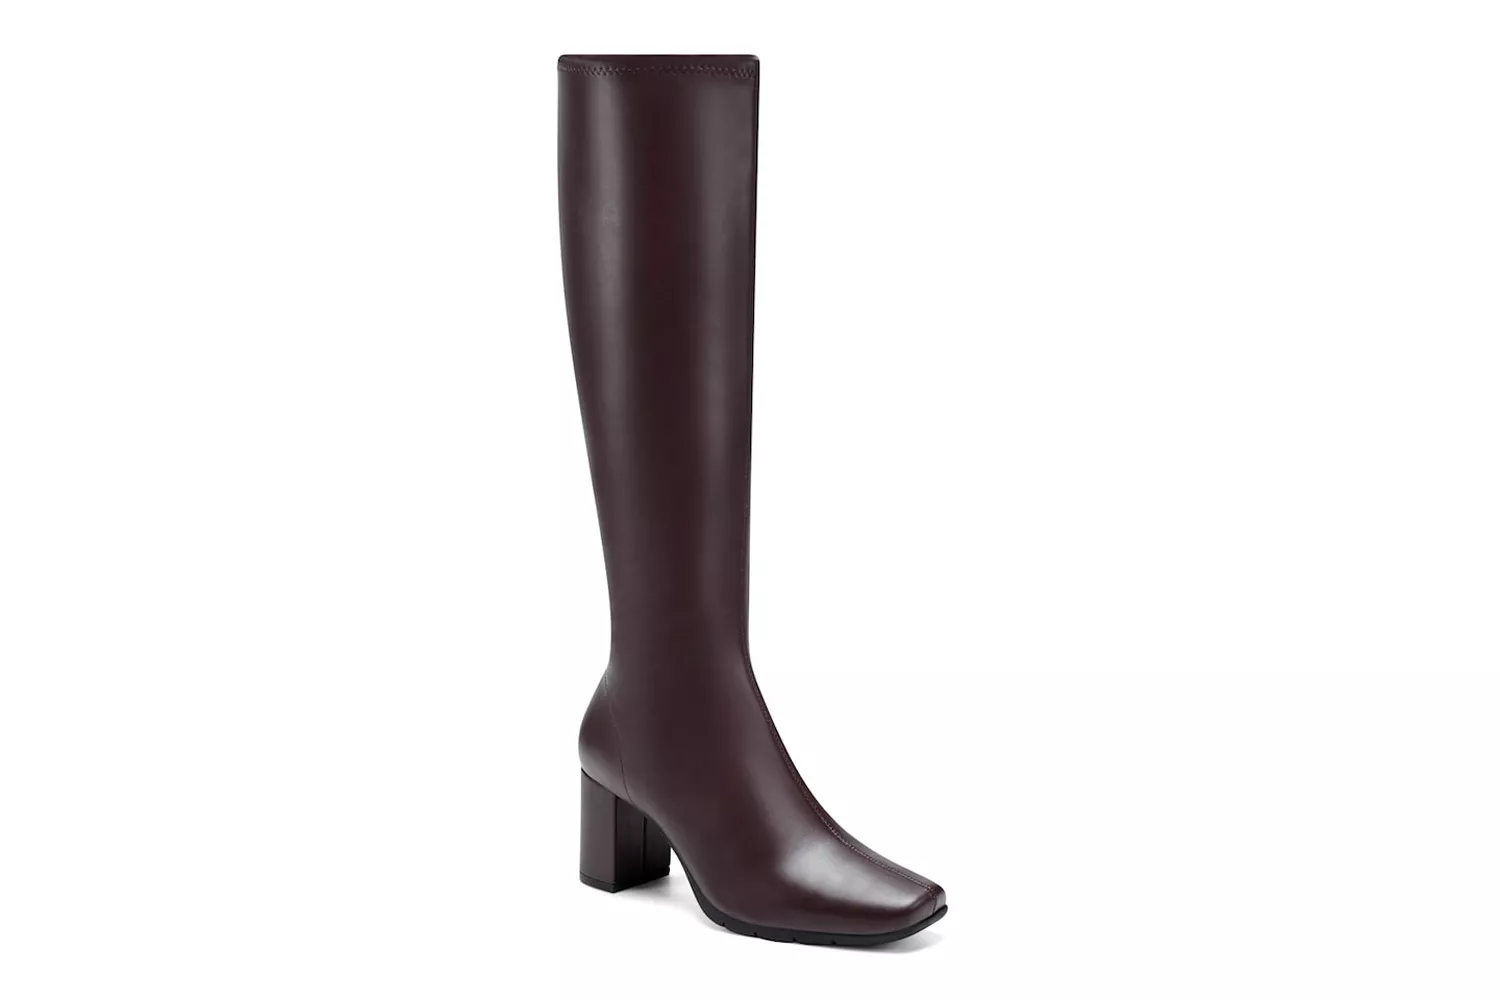 The Most Comfortable Knee-High Boots: Aerosoles Micah Boot